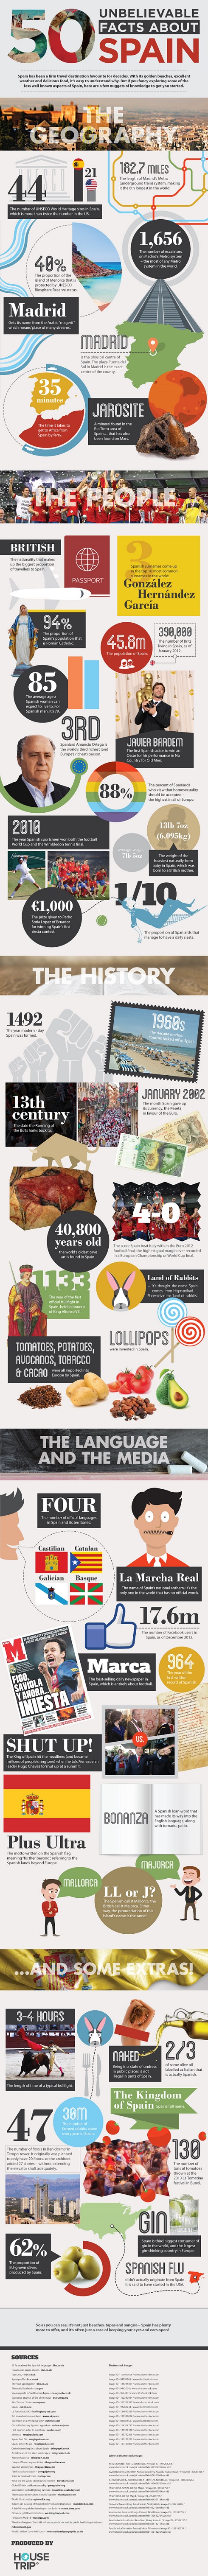 50 Unbelieveable Facts about Spain